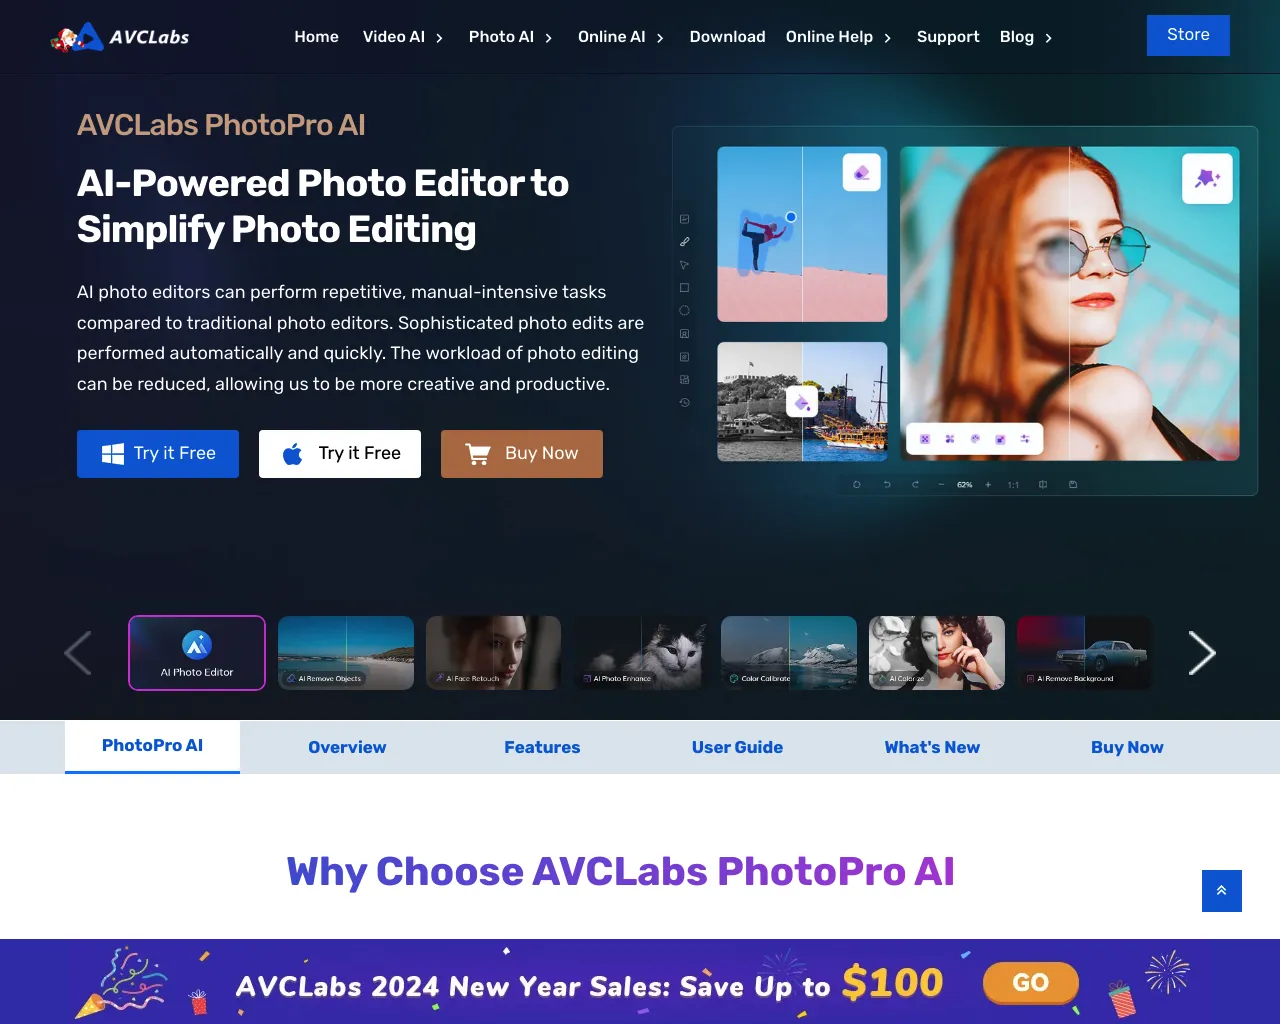 AVCLabs PhotoPro AI